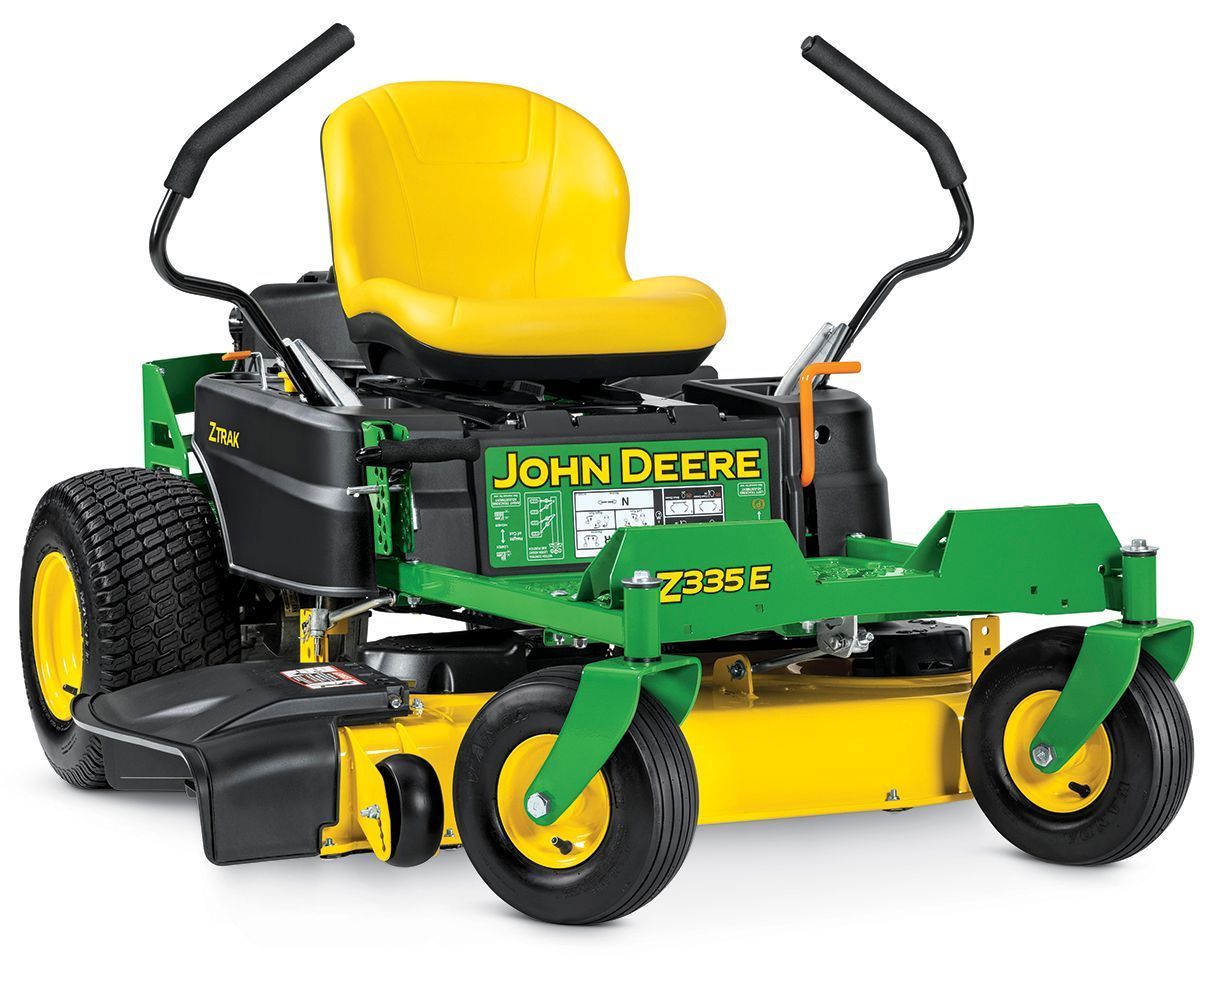 John Deere Z335E 20 HP V Twin Dual Hydrostatic 42 In Zero Turn Lawn Mower With Mulching Capability (Kit Sold Separately) In The Zero Turn Riding Lawn Mowers Department At Lowes.com